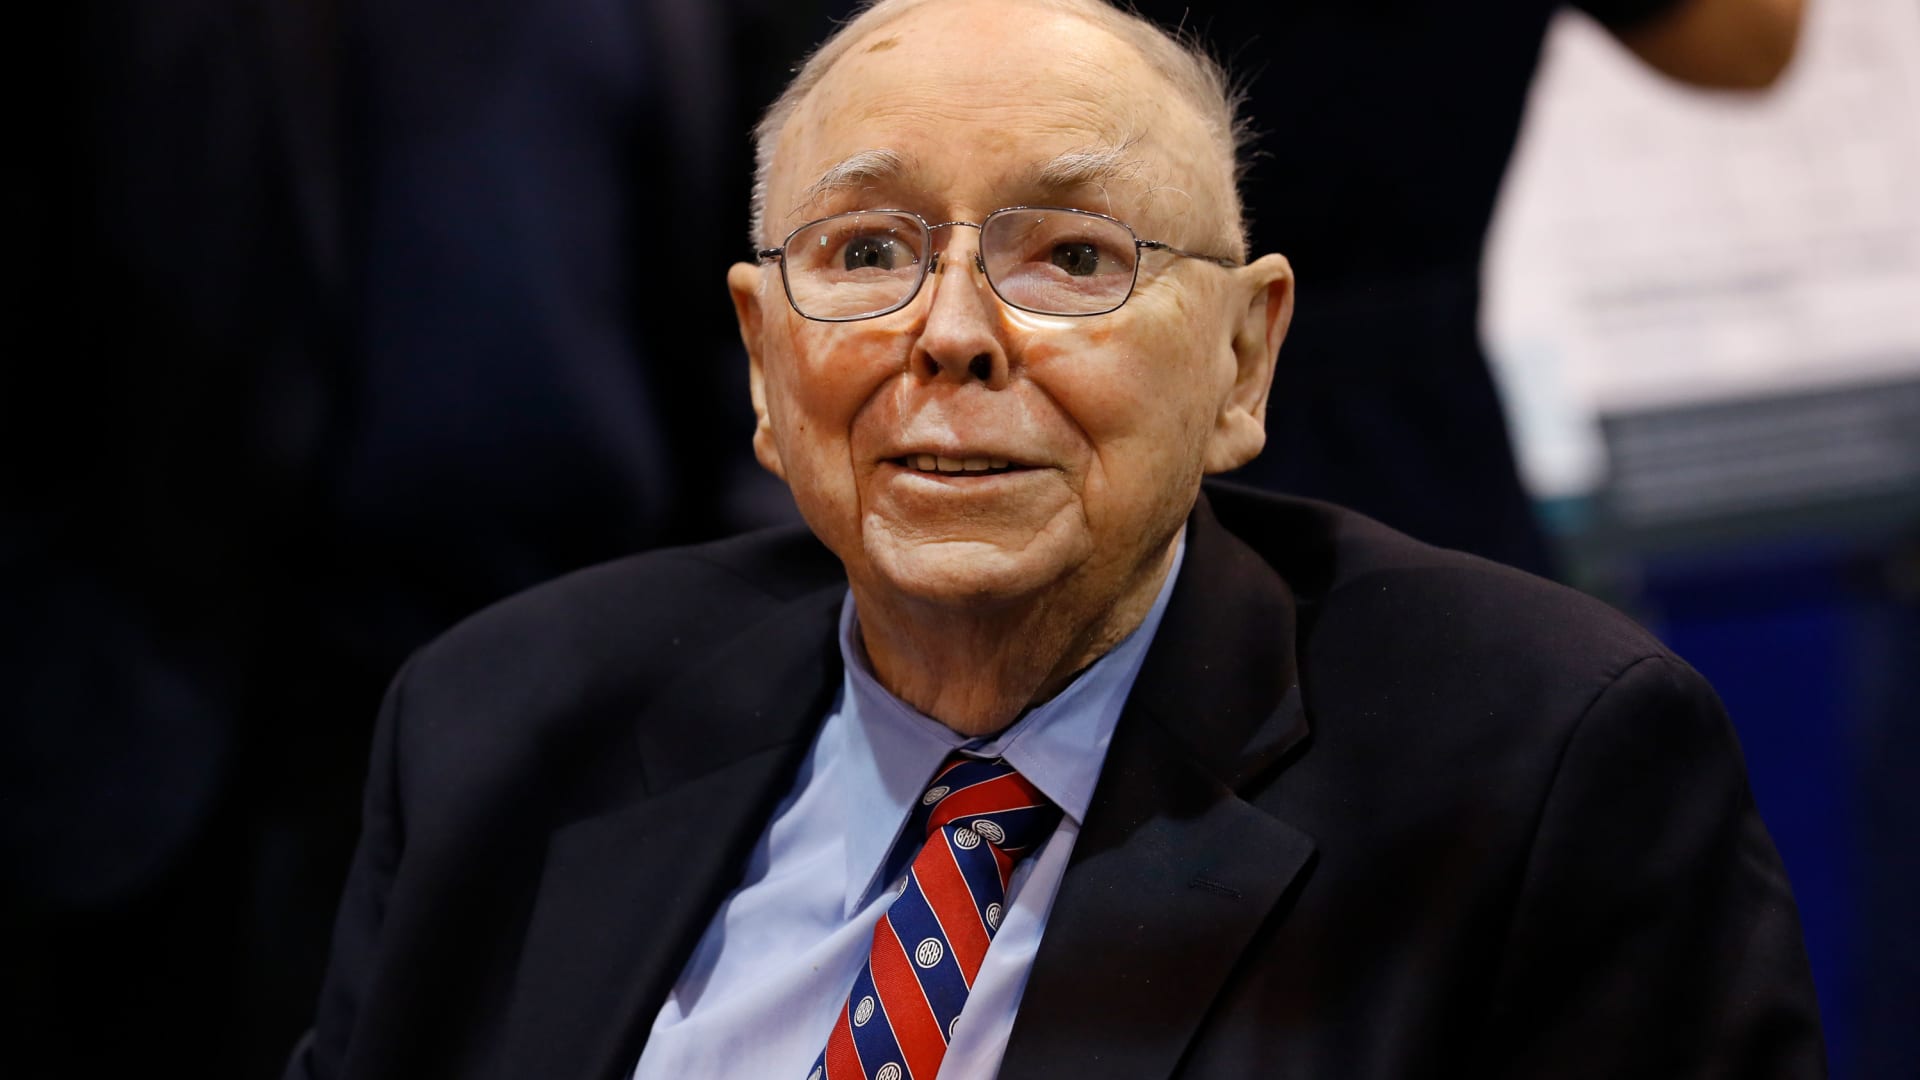 Watch Charlie Munger speak at the Daily Journal annual meeting